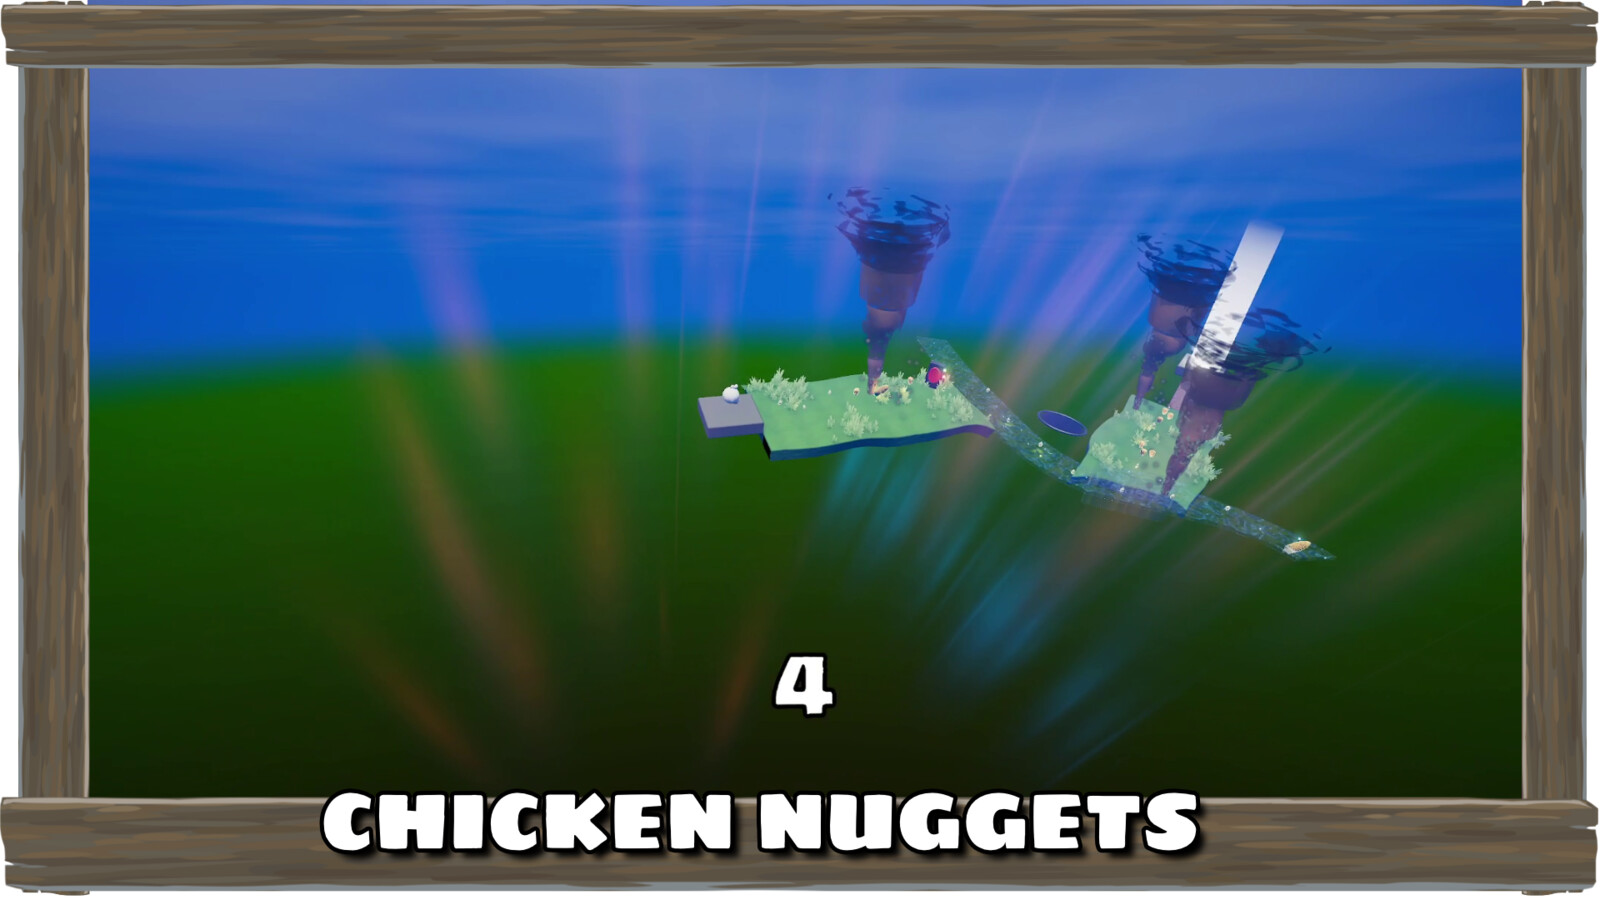 Some levels in Chicken Nuggets are full of environmental interactions and hazards.